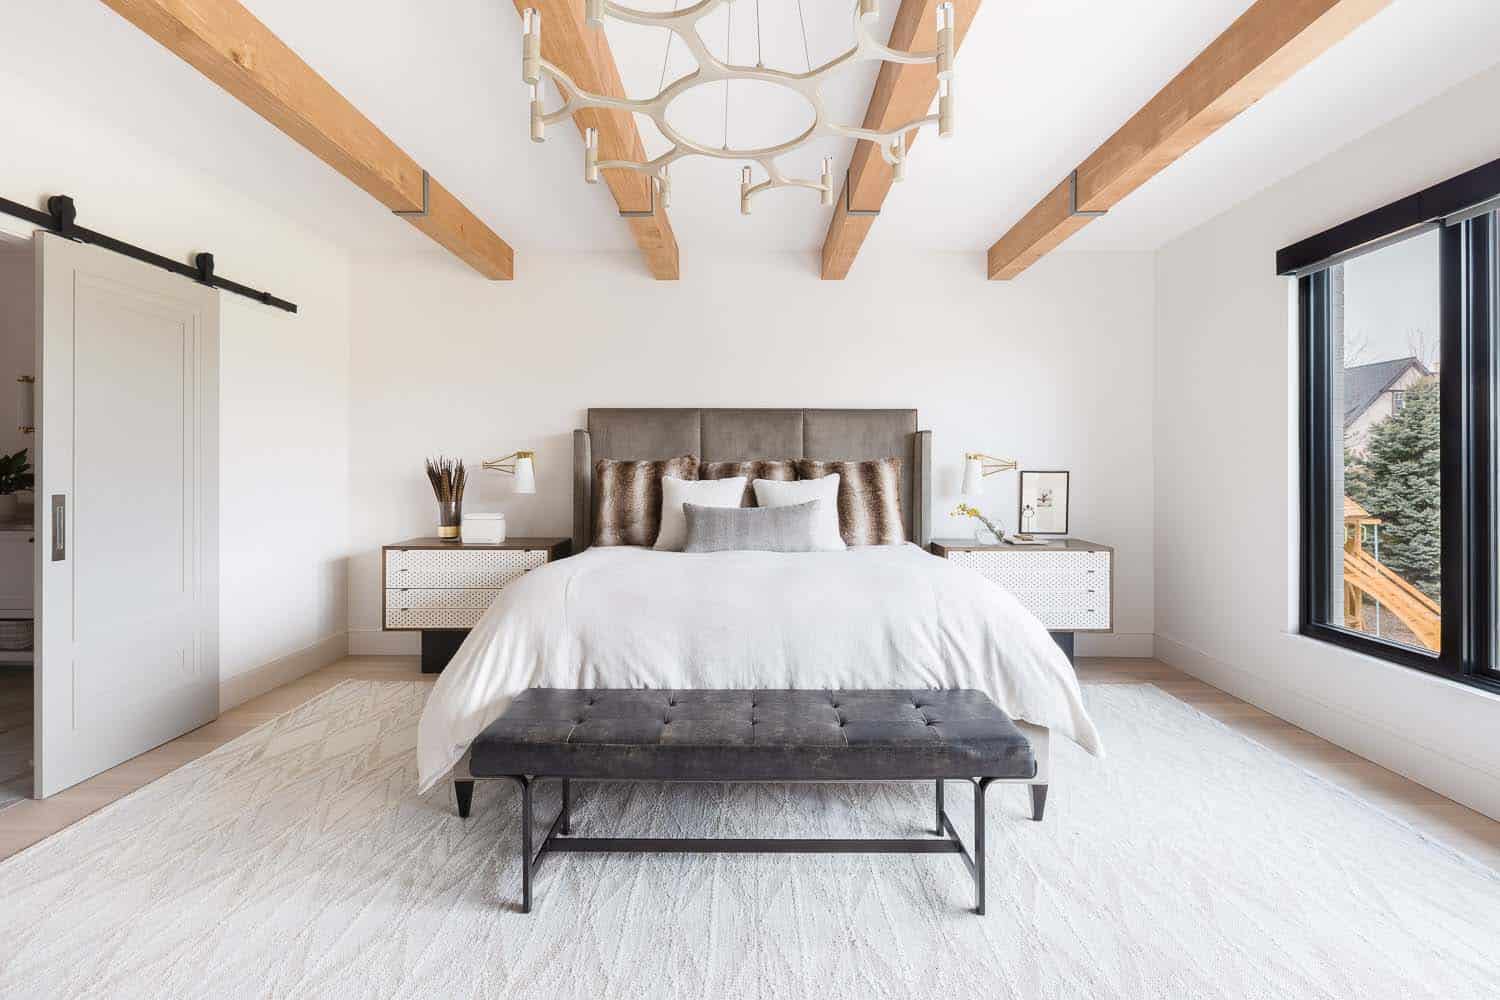 transitional style bedroom with wood beams on the ceiling